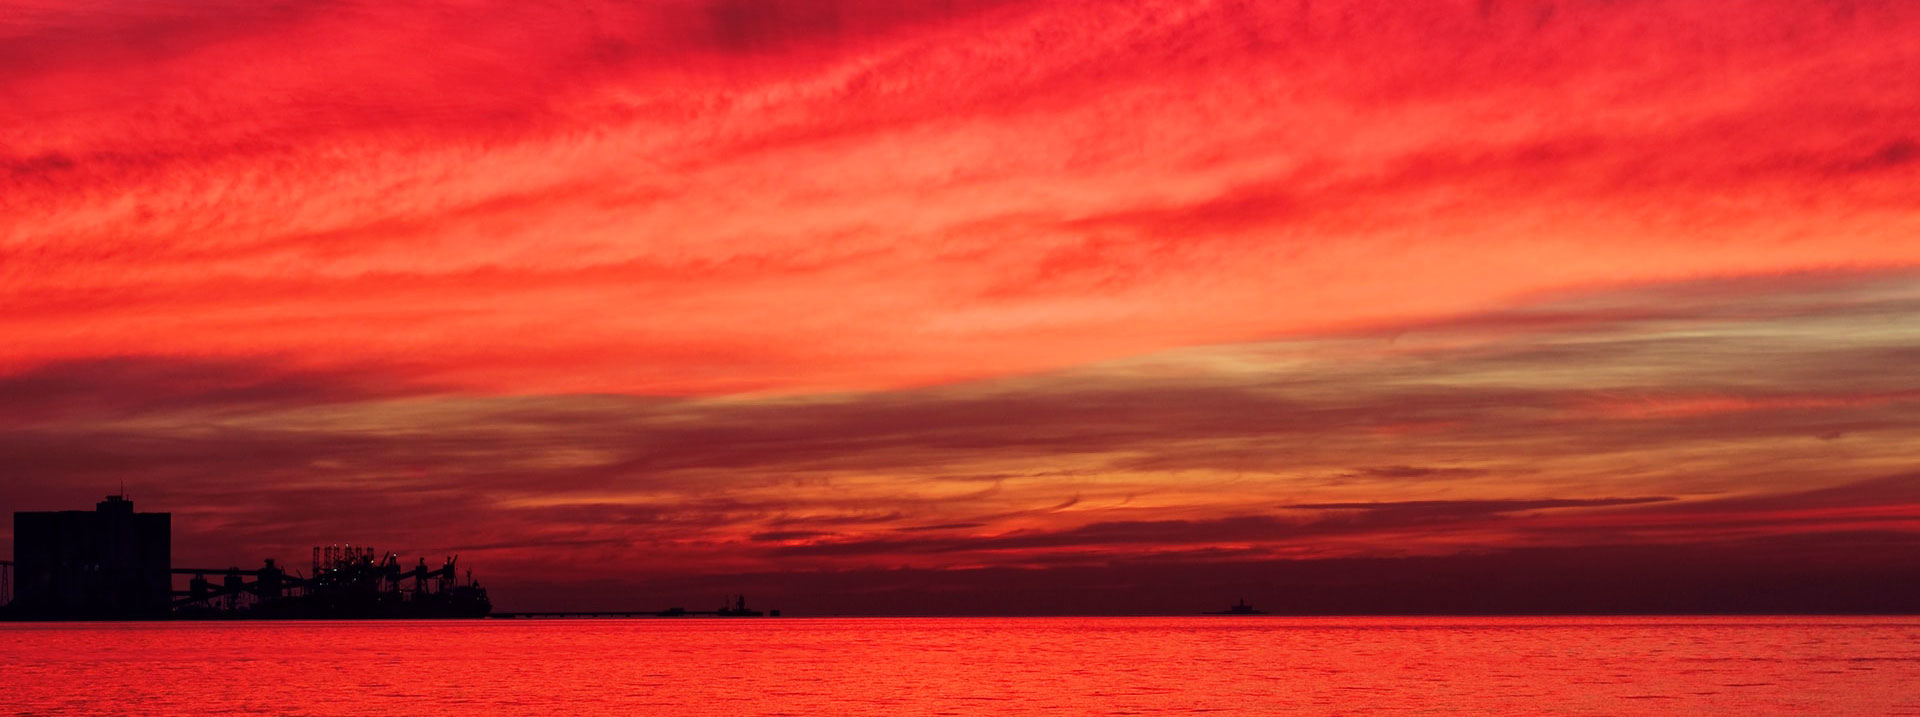 Wide view of a red sky at night, the concept of sailor superstitions.